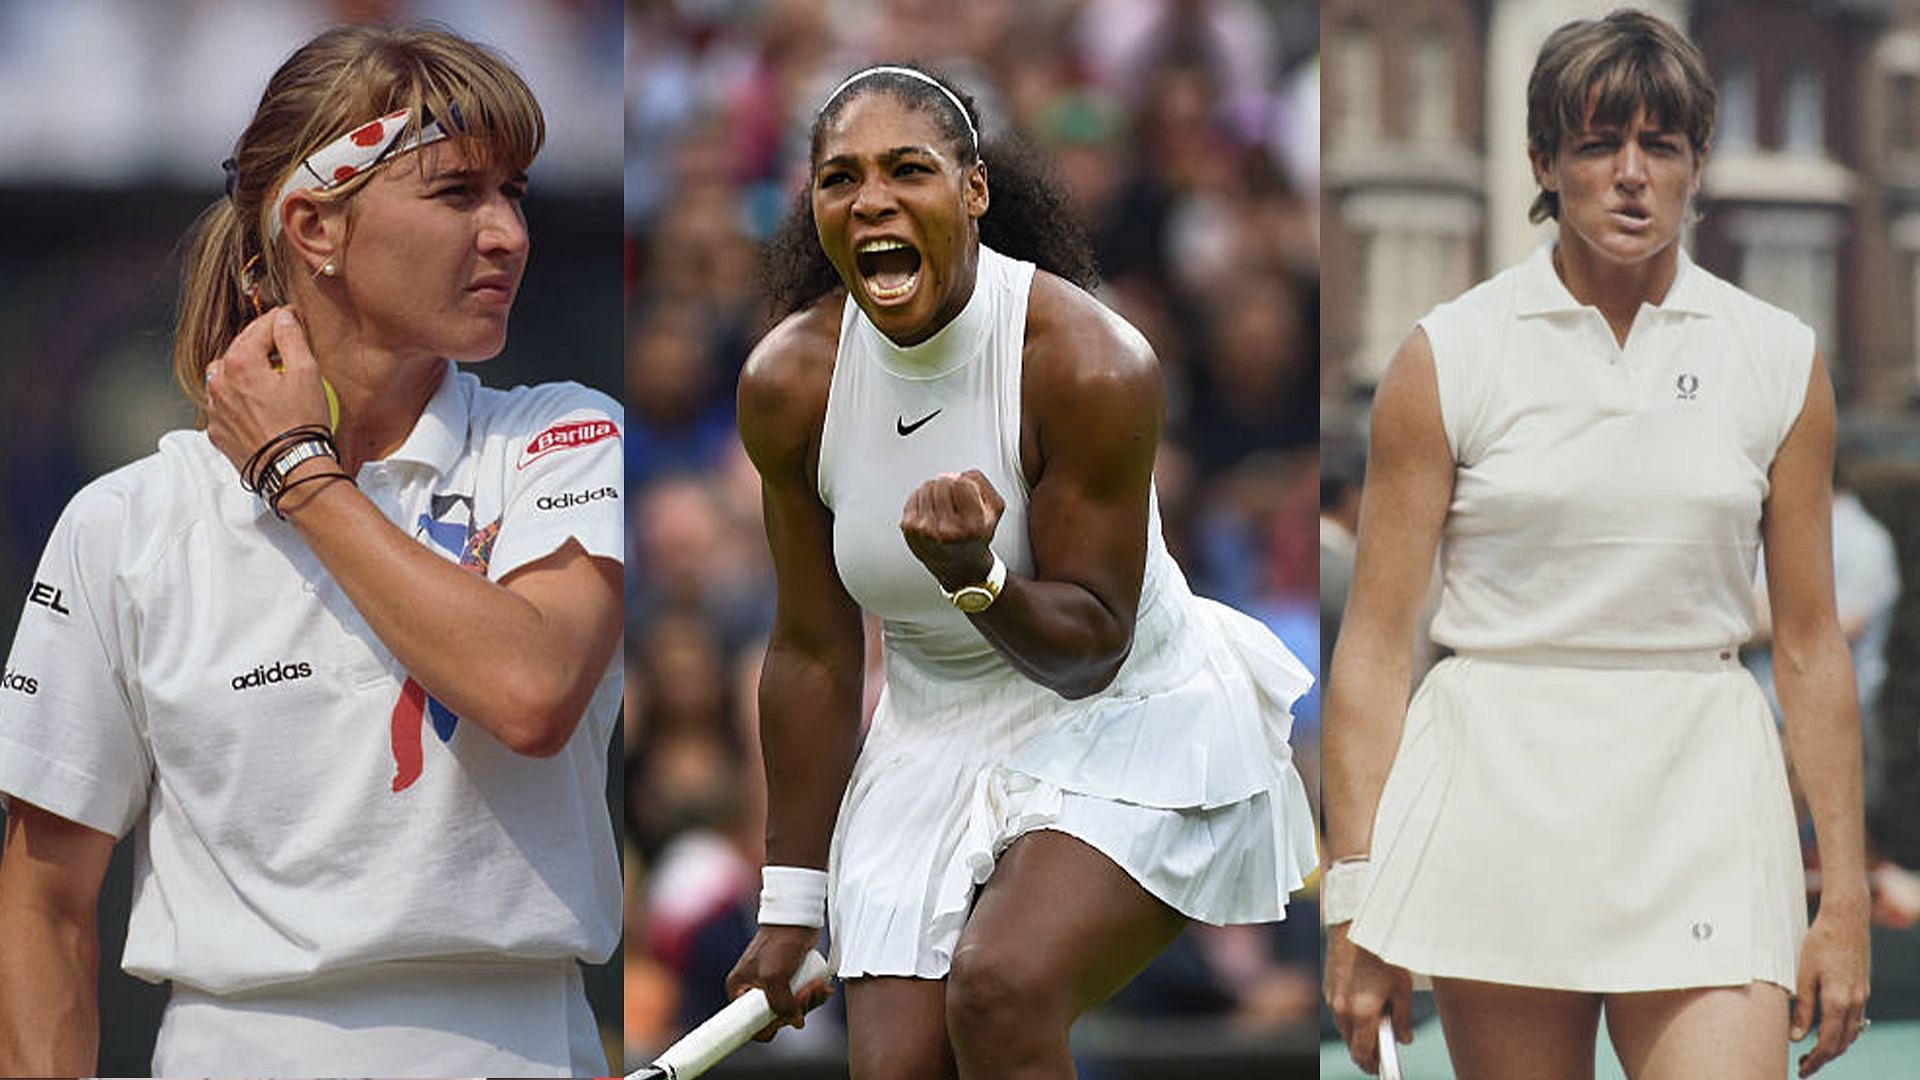 Steffi Graf, Serena Williams and Margaret Court are the three most successful women